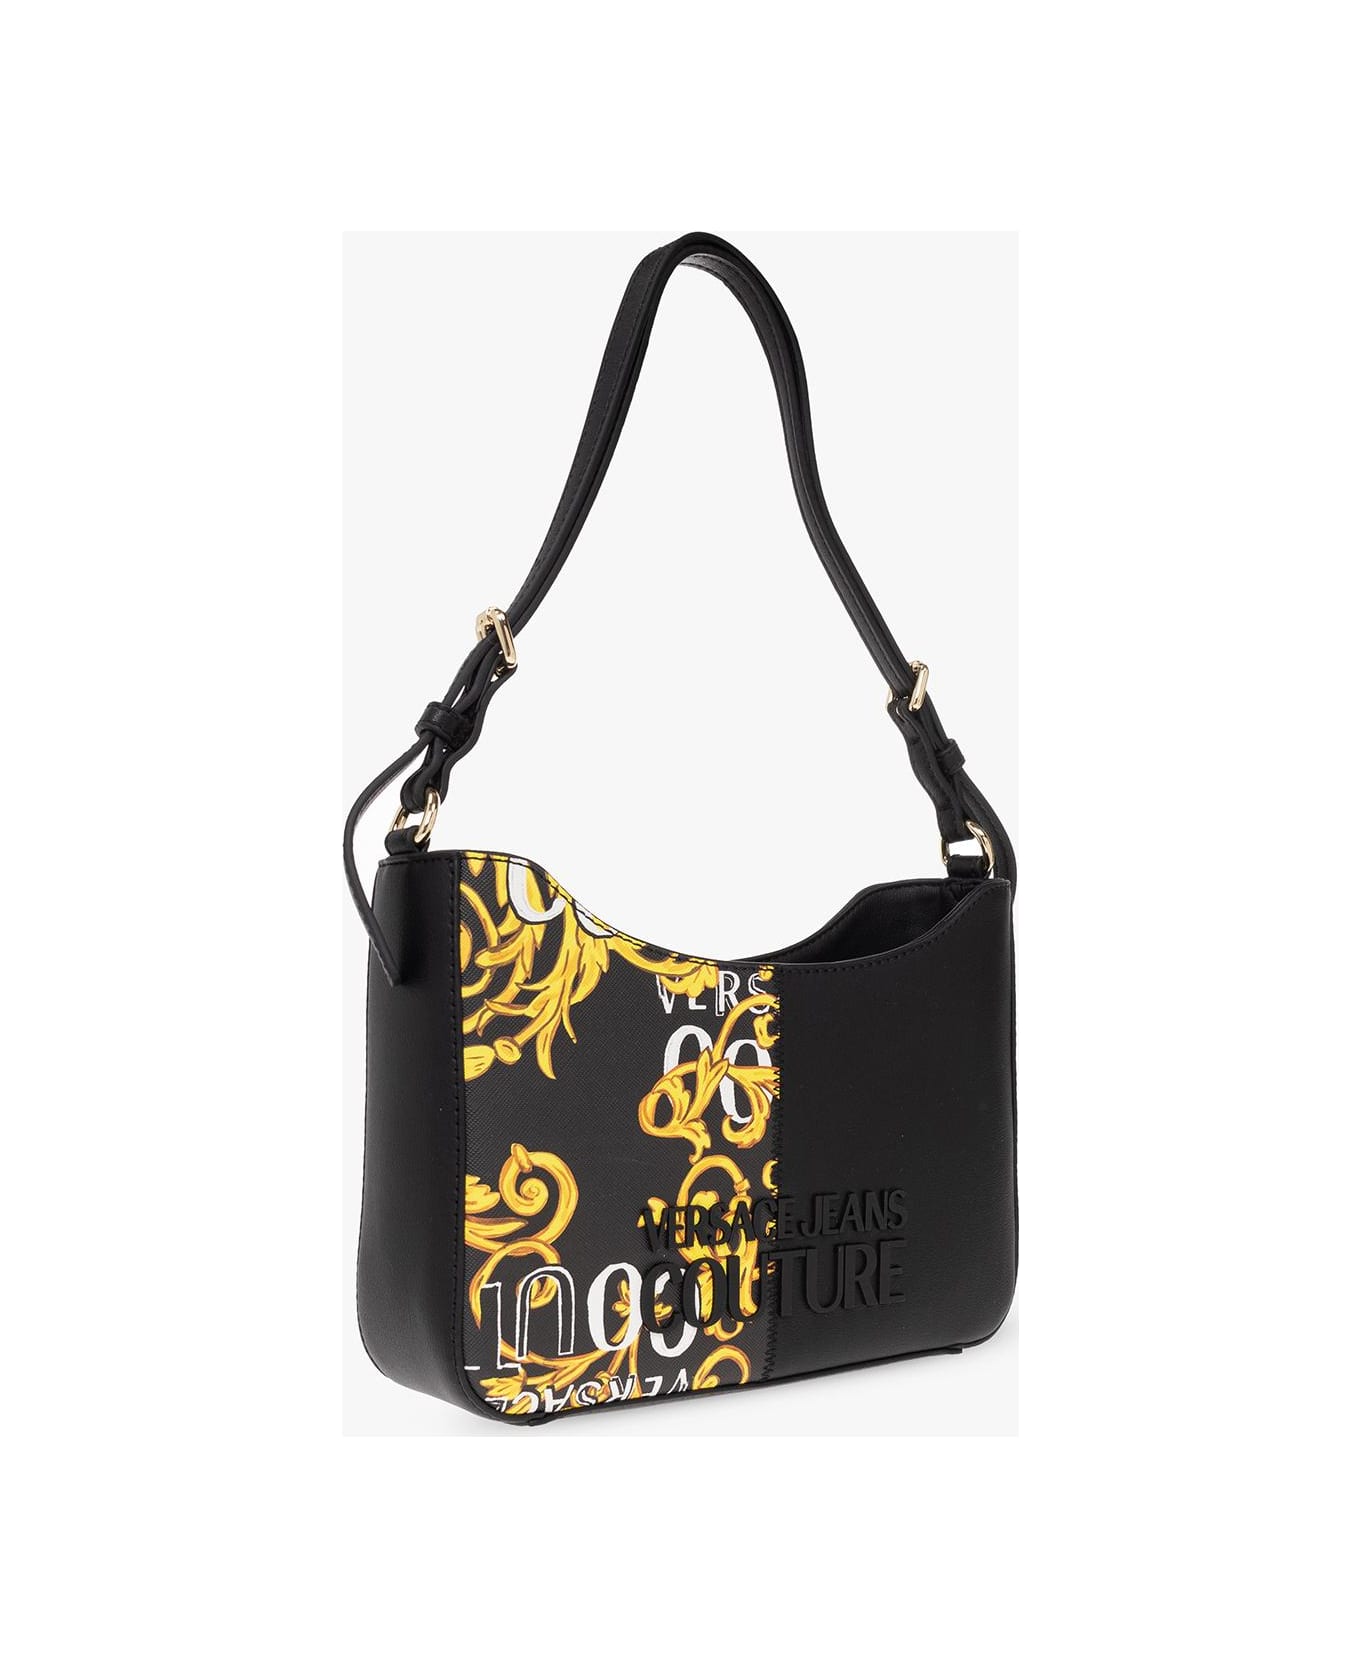 Versace Jeans Couture Bag - BLACK/GOLD